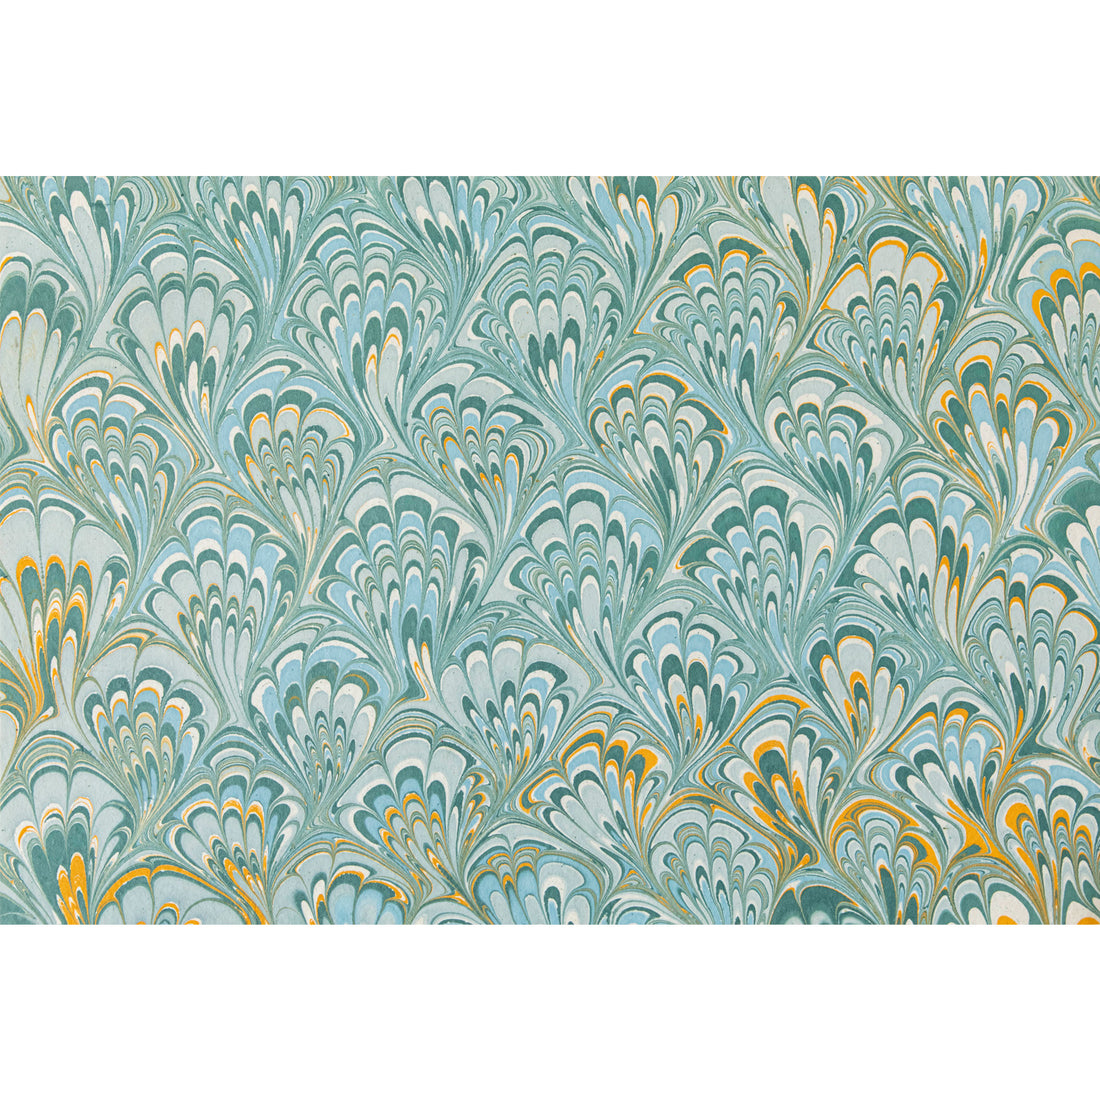 An abstract, marbled pattern resembling a grid of fans in teal, light blue, and sea foam with marigold accents.